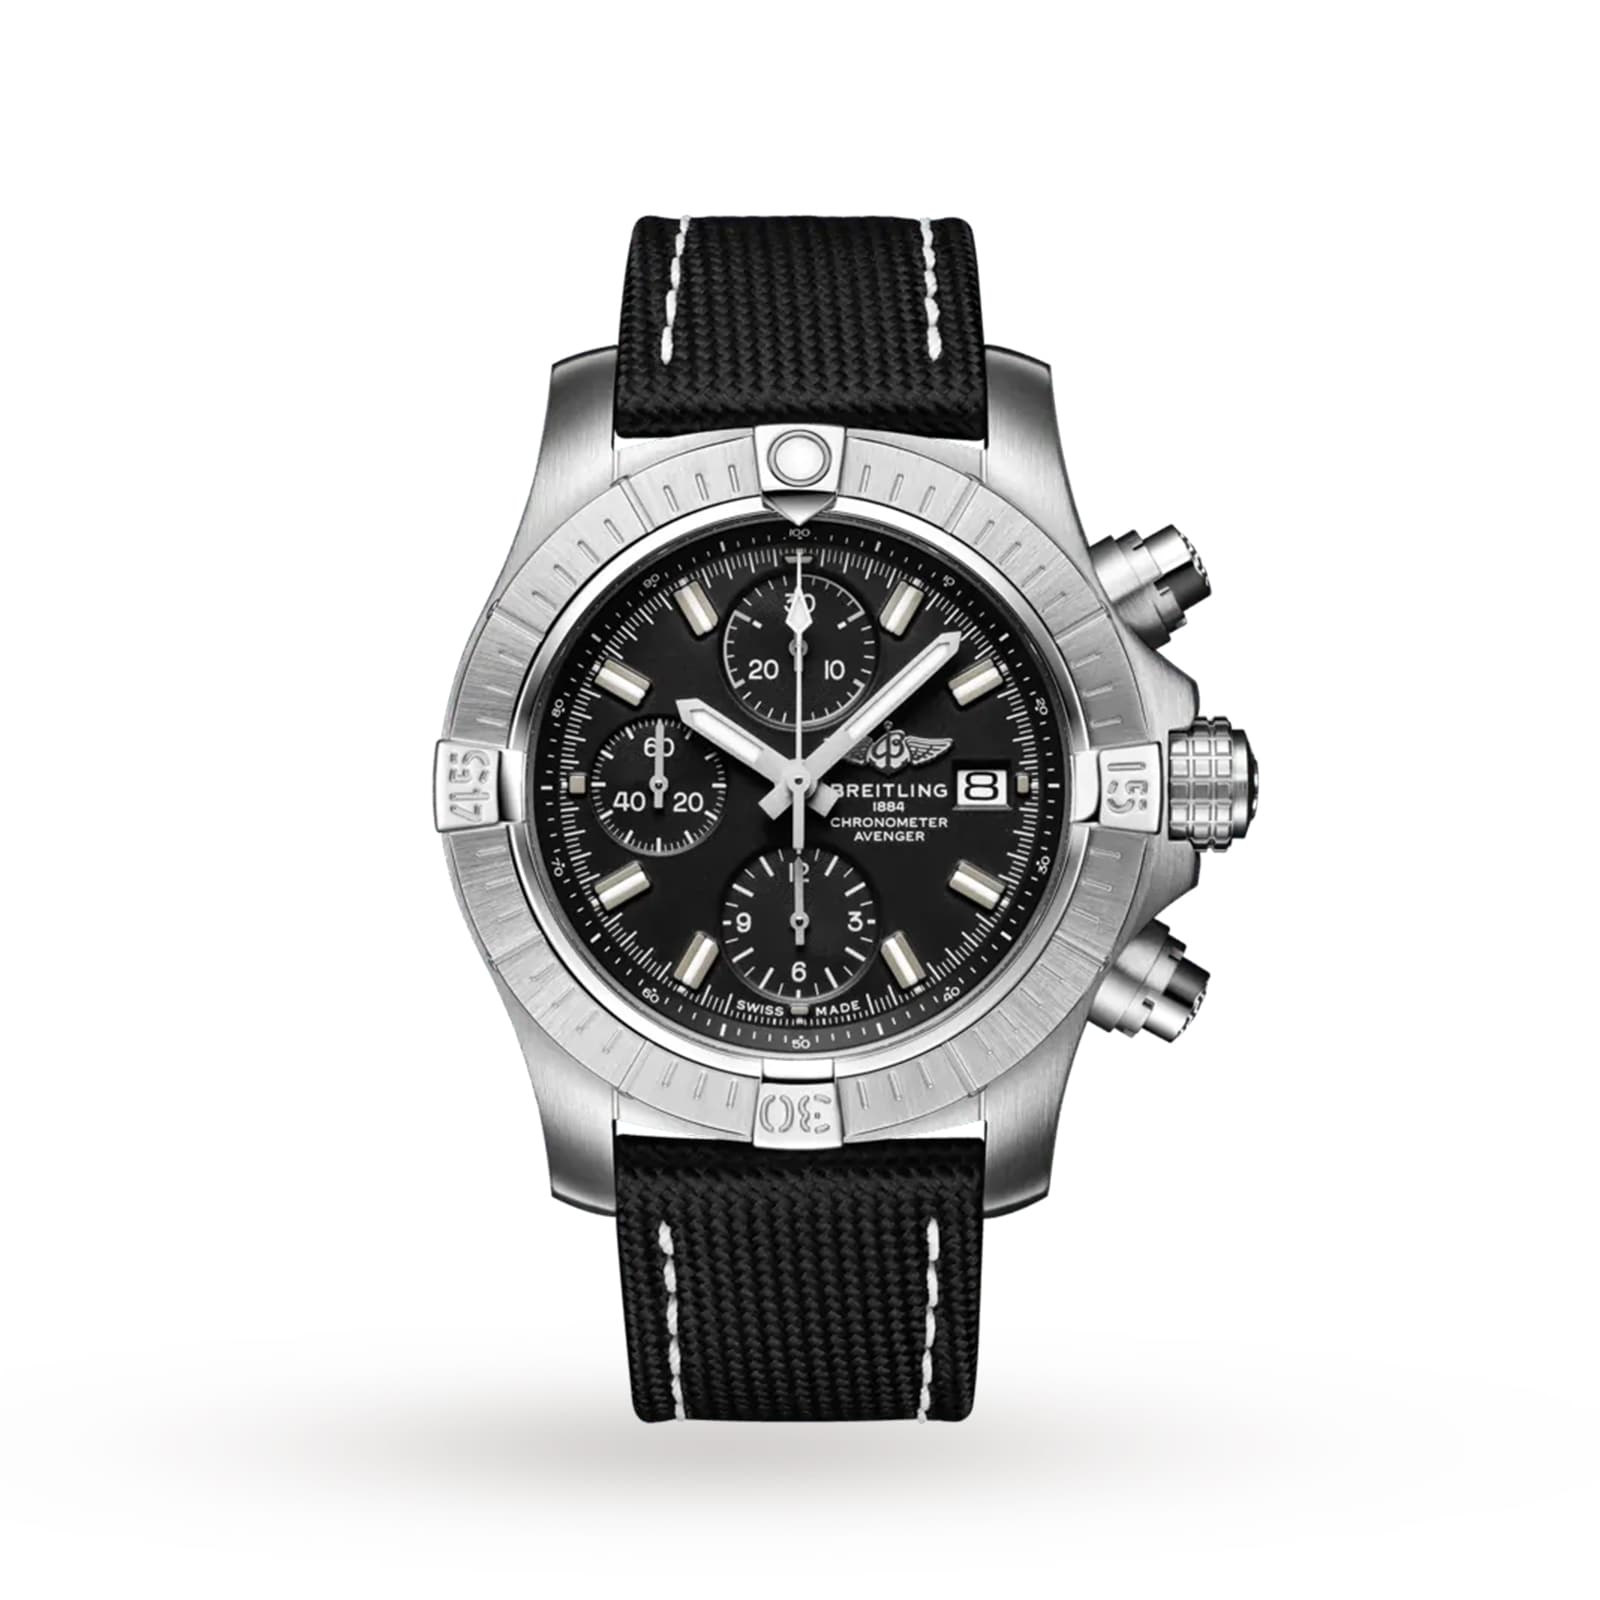 Avenger Chronograph 43 Stainless Steel Leather Strap Watch